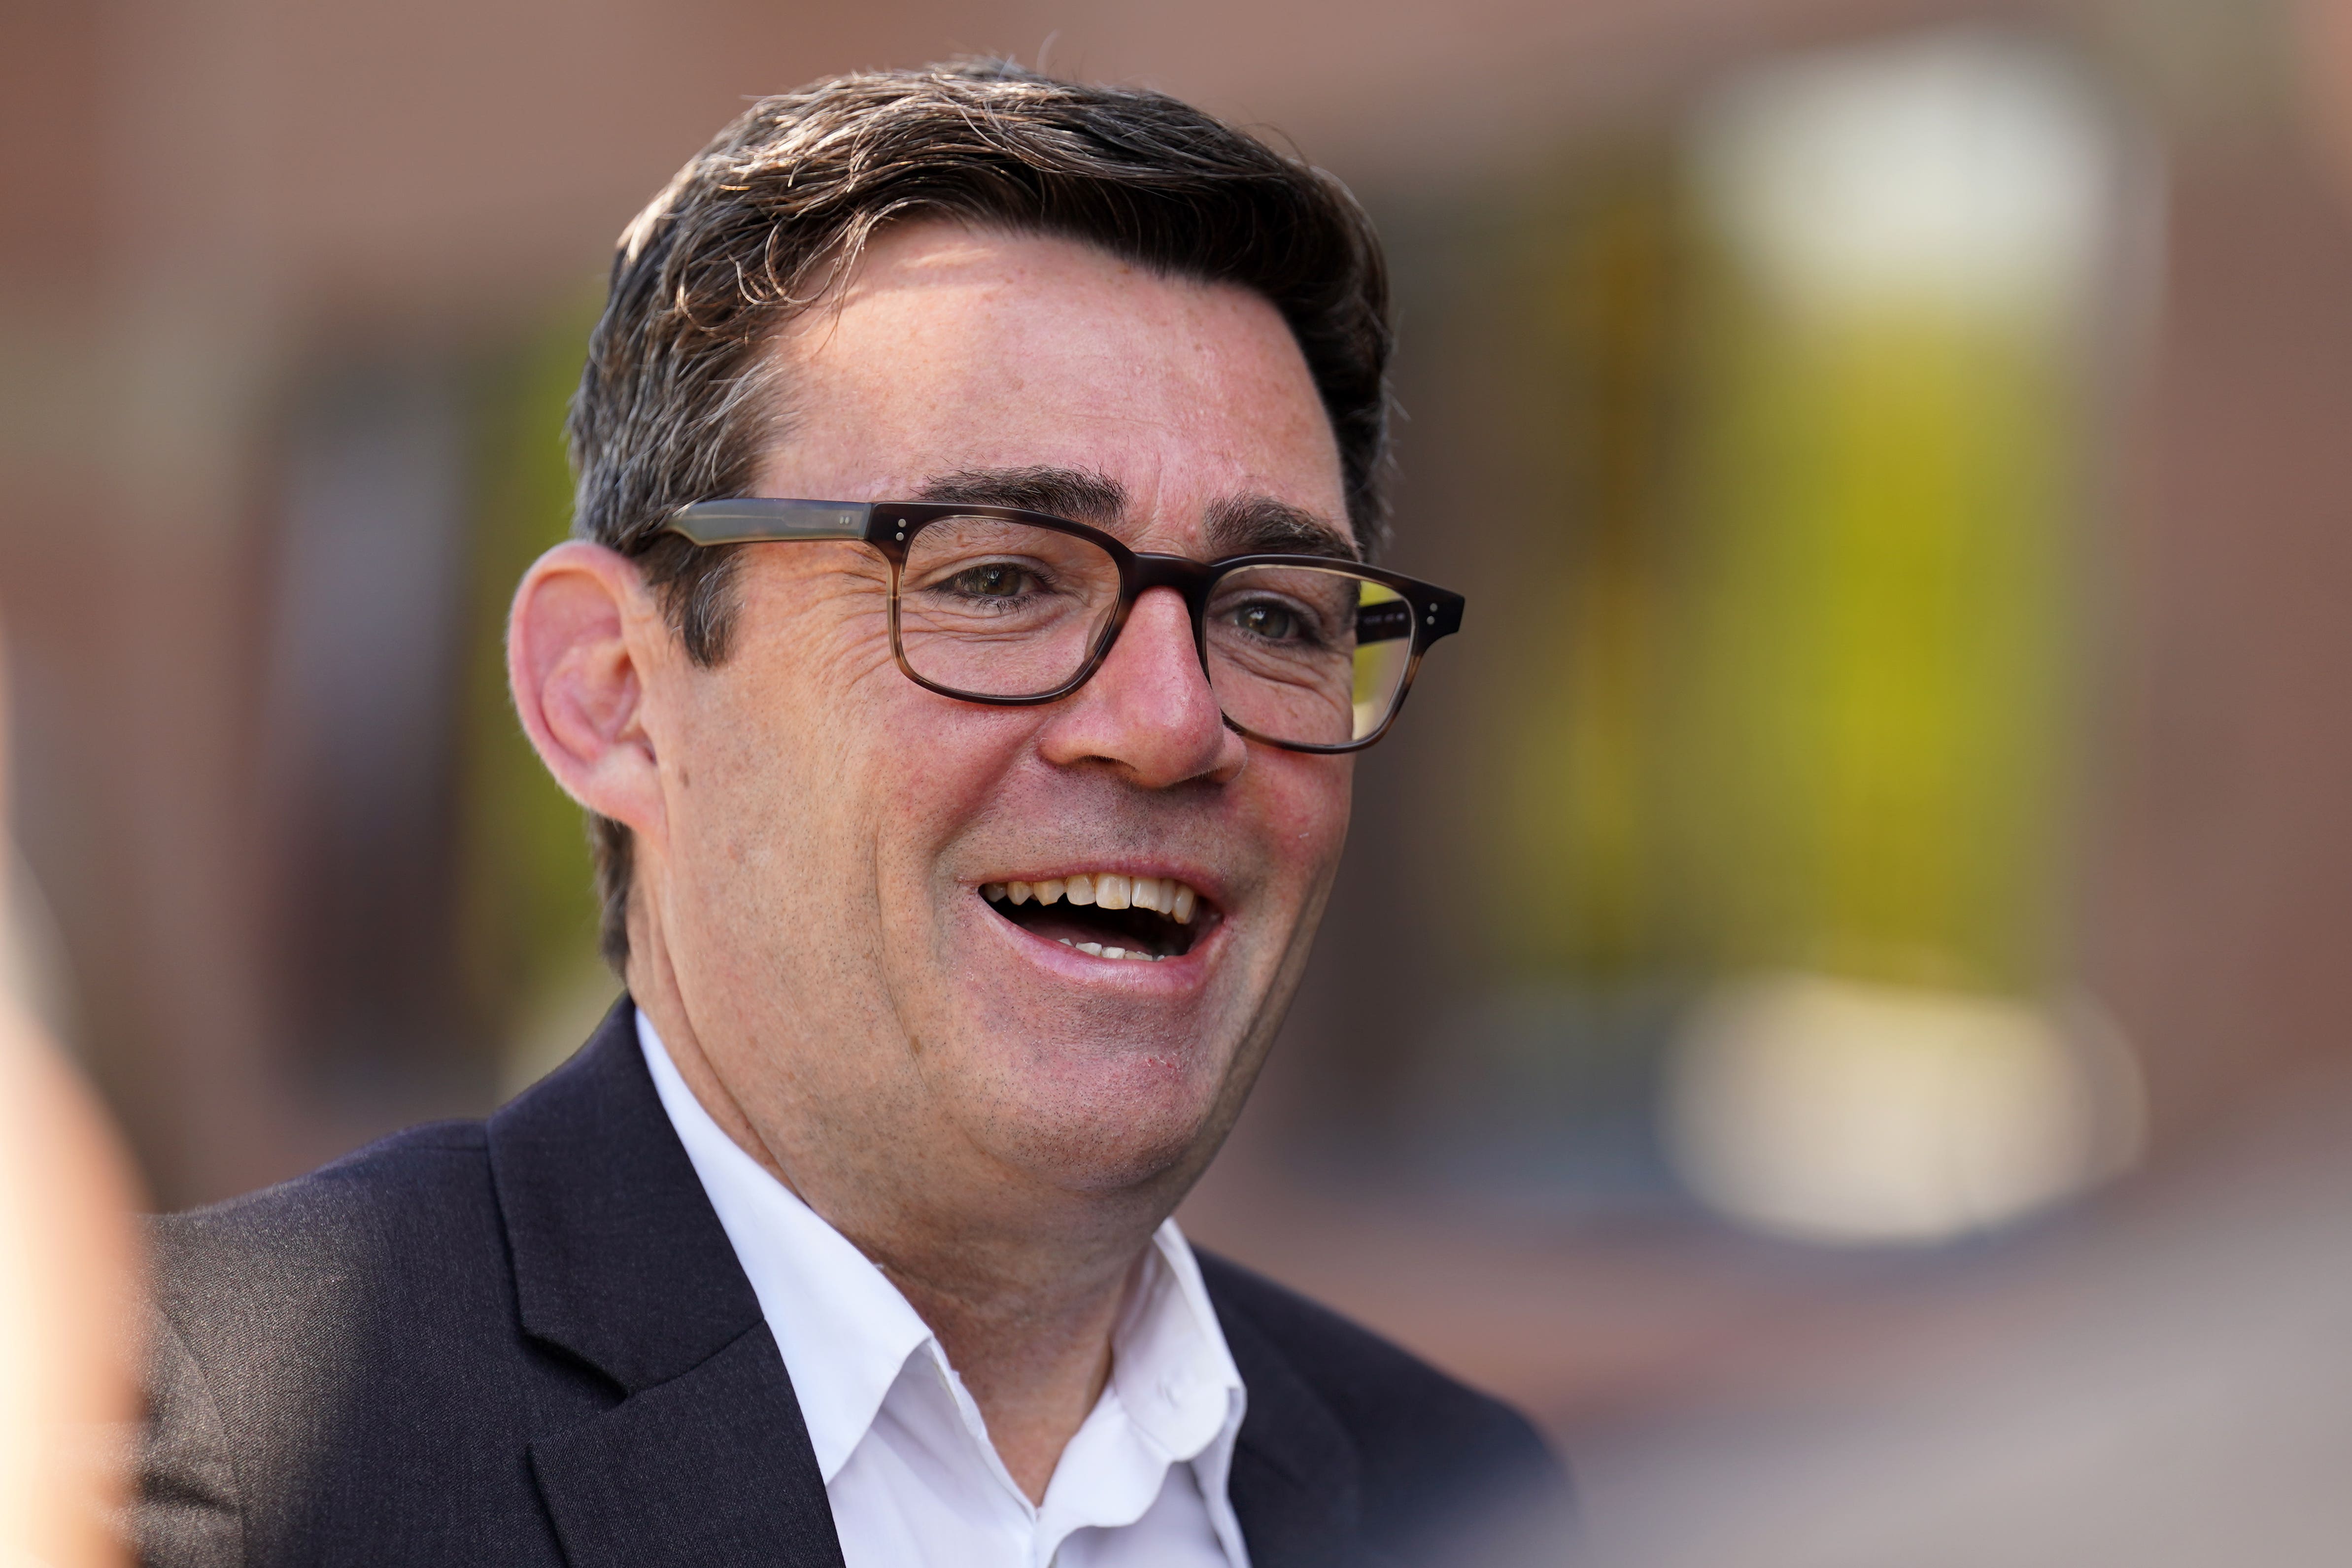 Andy Burnham accused the Premier League of an ‘abuse of process’ over the Everton point deduction (Andrew Milligan/PA)